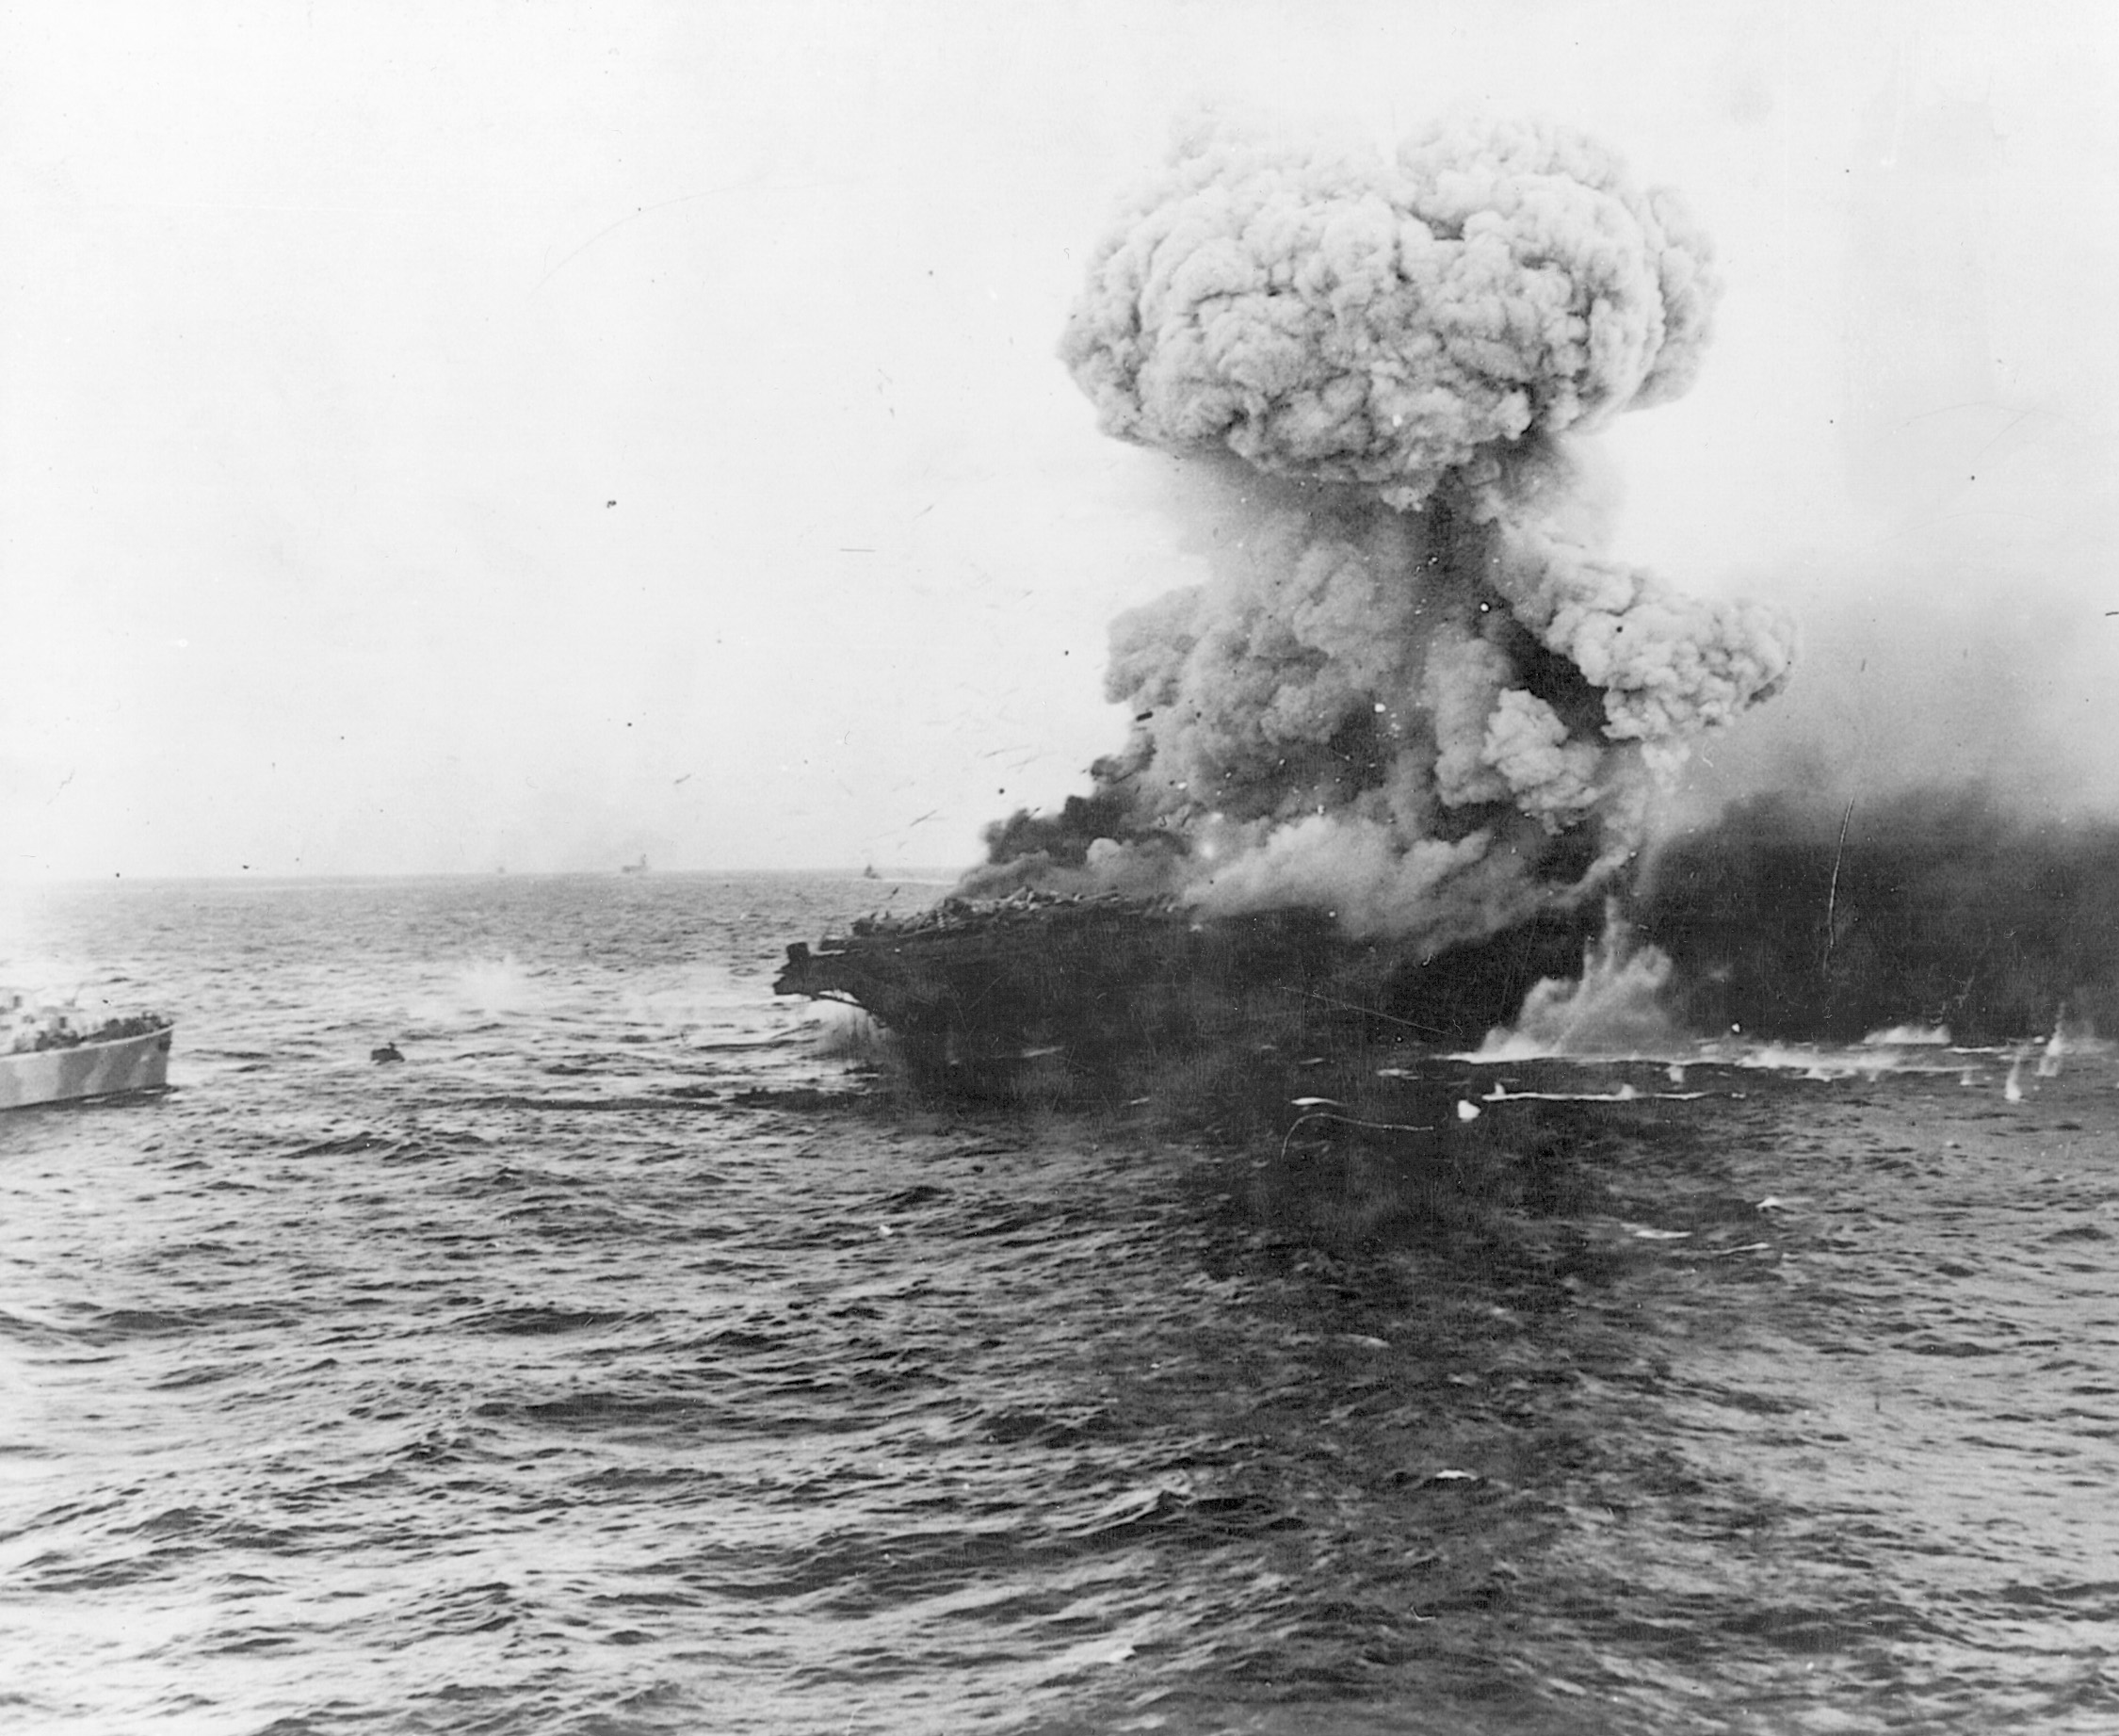 The aircraft carrier Lexington is engulfed by the mushroom cloud of a catastrophic internal explosion. Efforts to save the Lady Lex failed, and the carrier settled to the bottom of the Coral Sea.